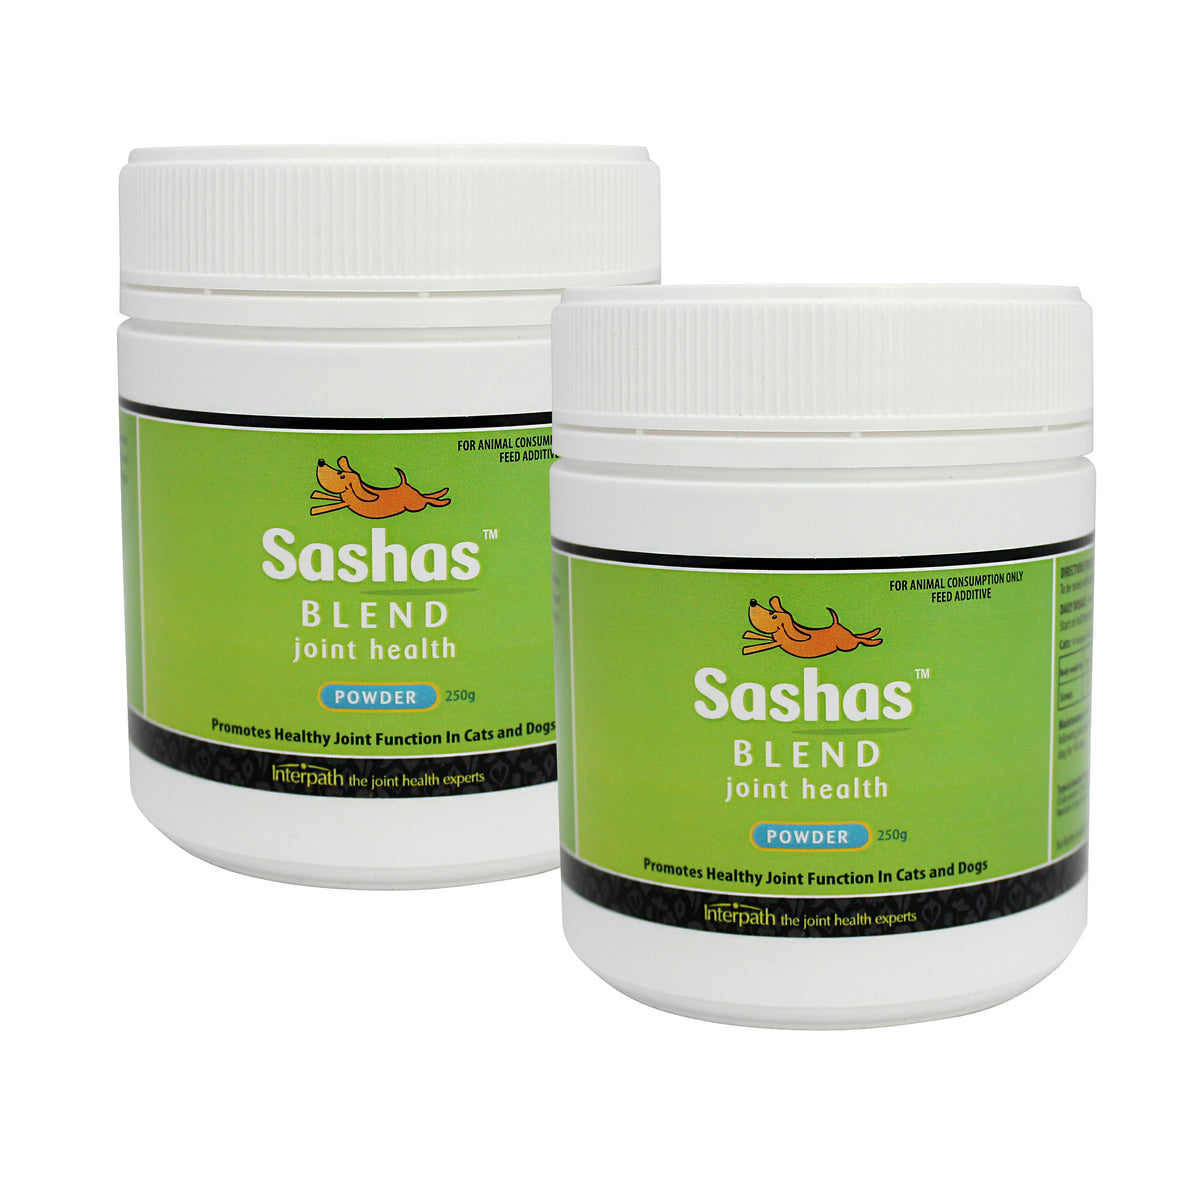 Sashas Blend Joint Powder for Dogs and Cats Value Bundle